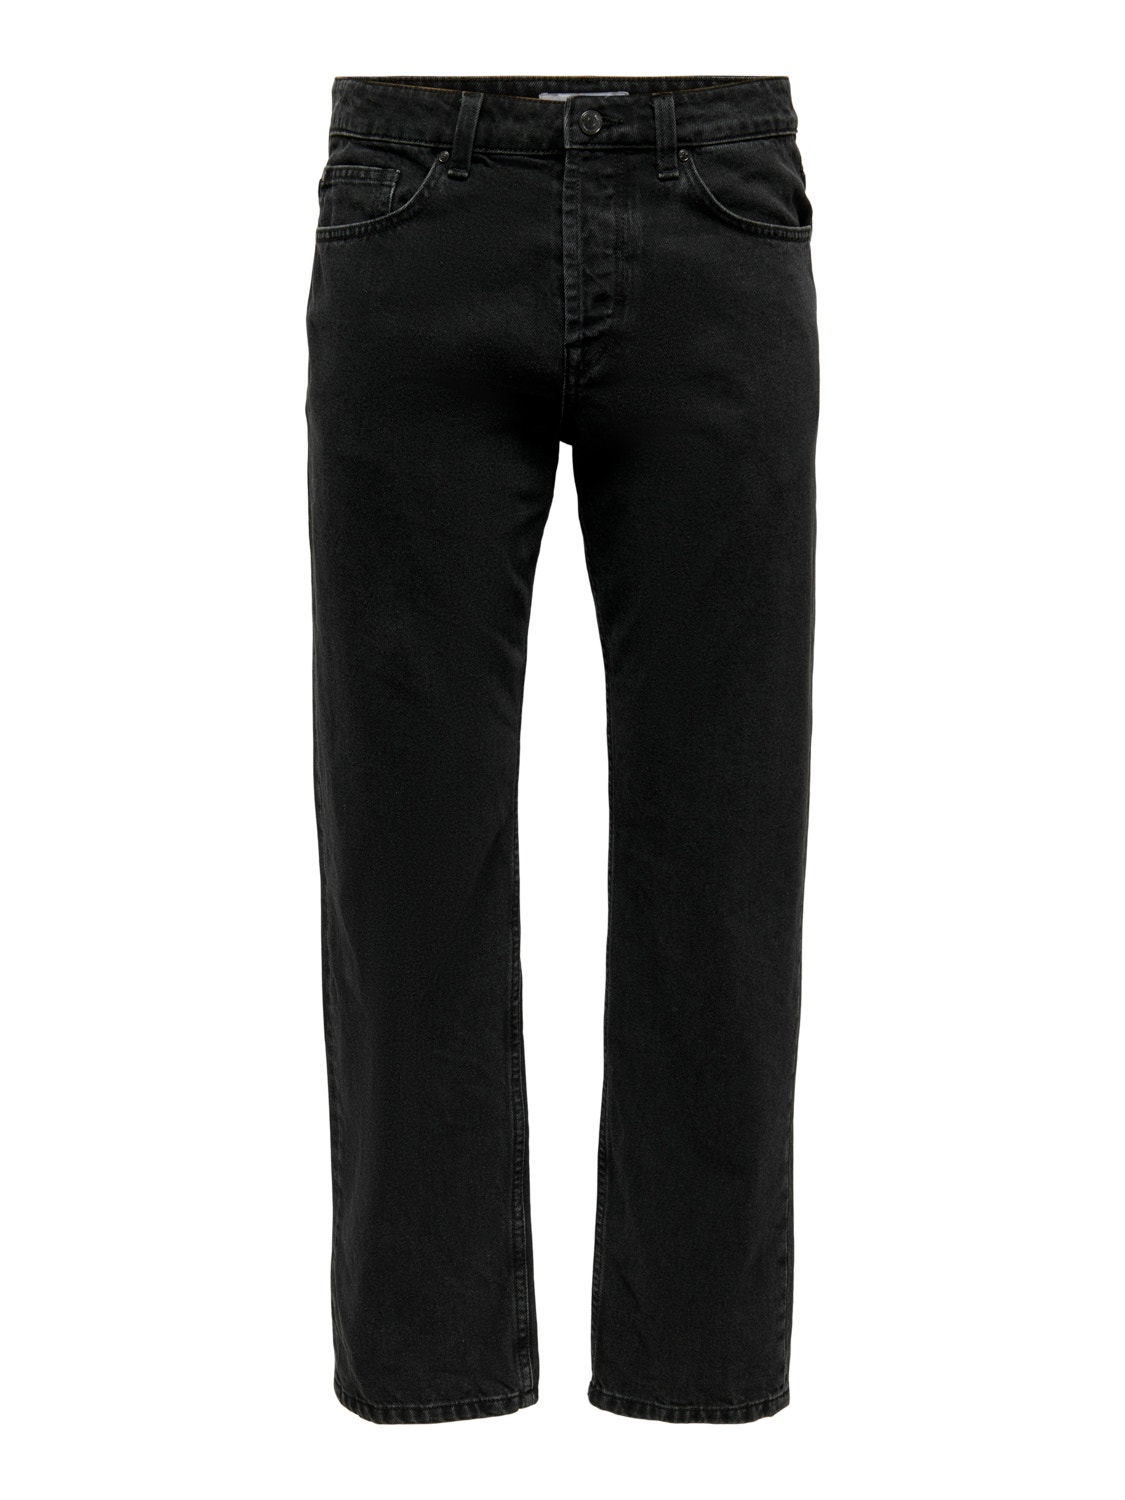 ONLY & SONS Jeans Straight Fit Taille classique -Black Denim - 22022961